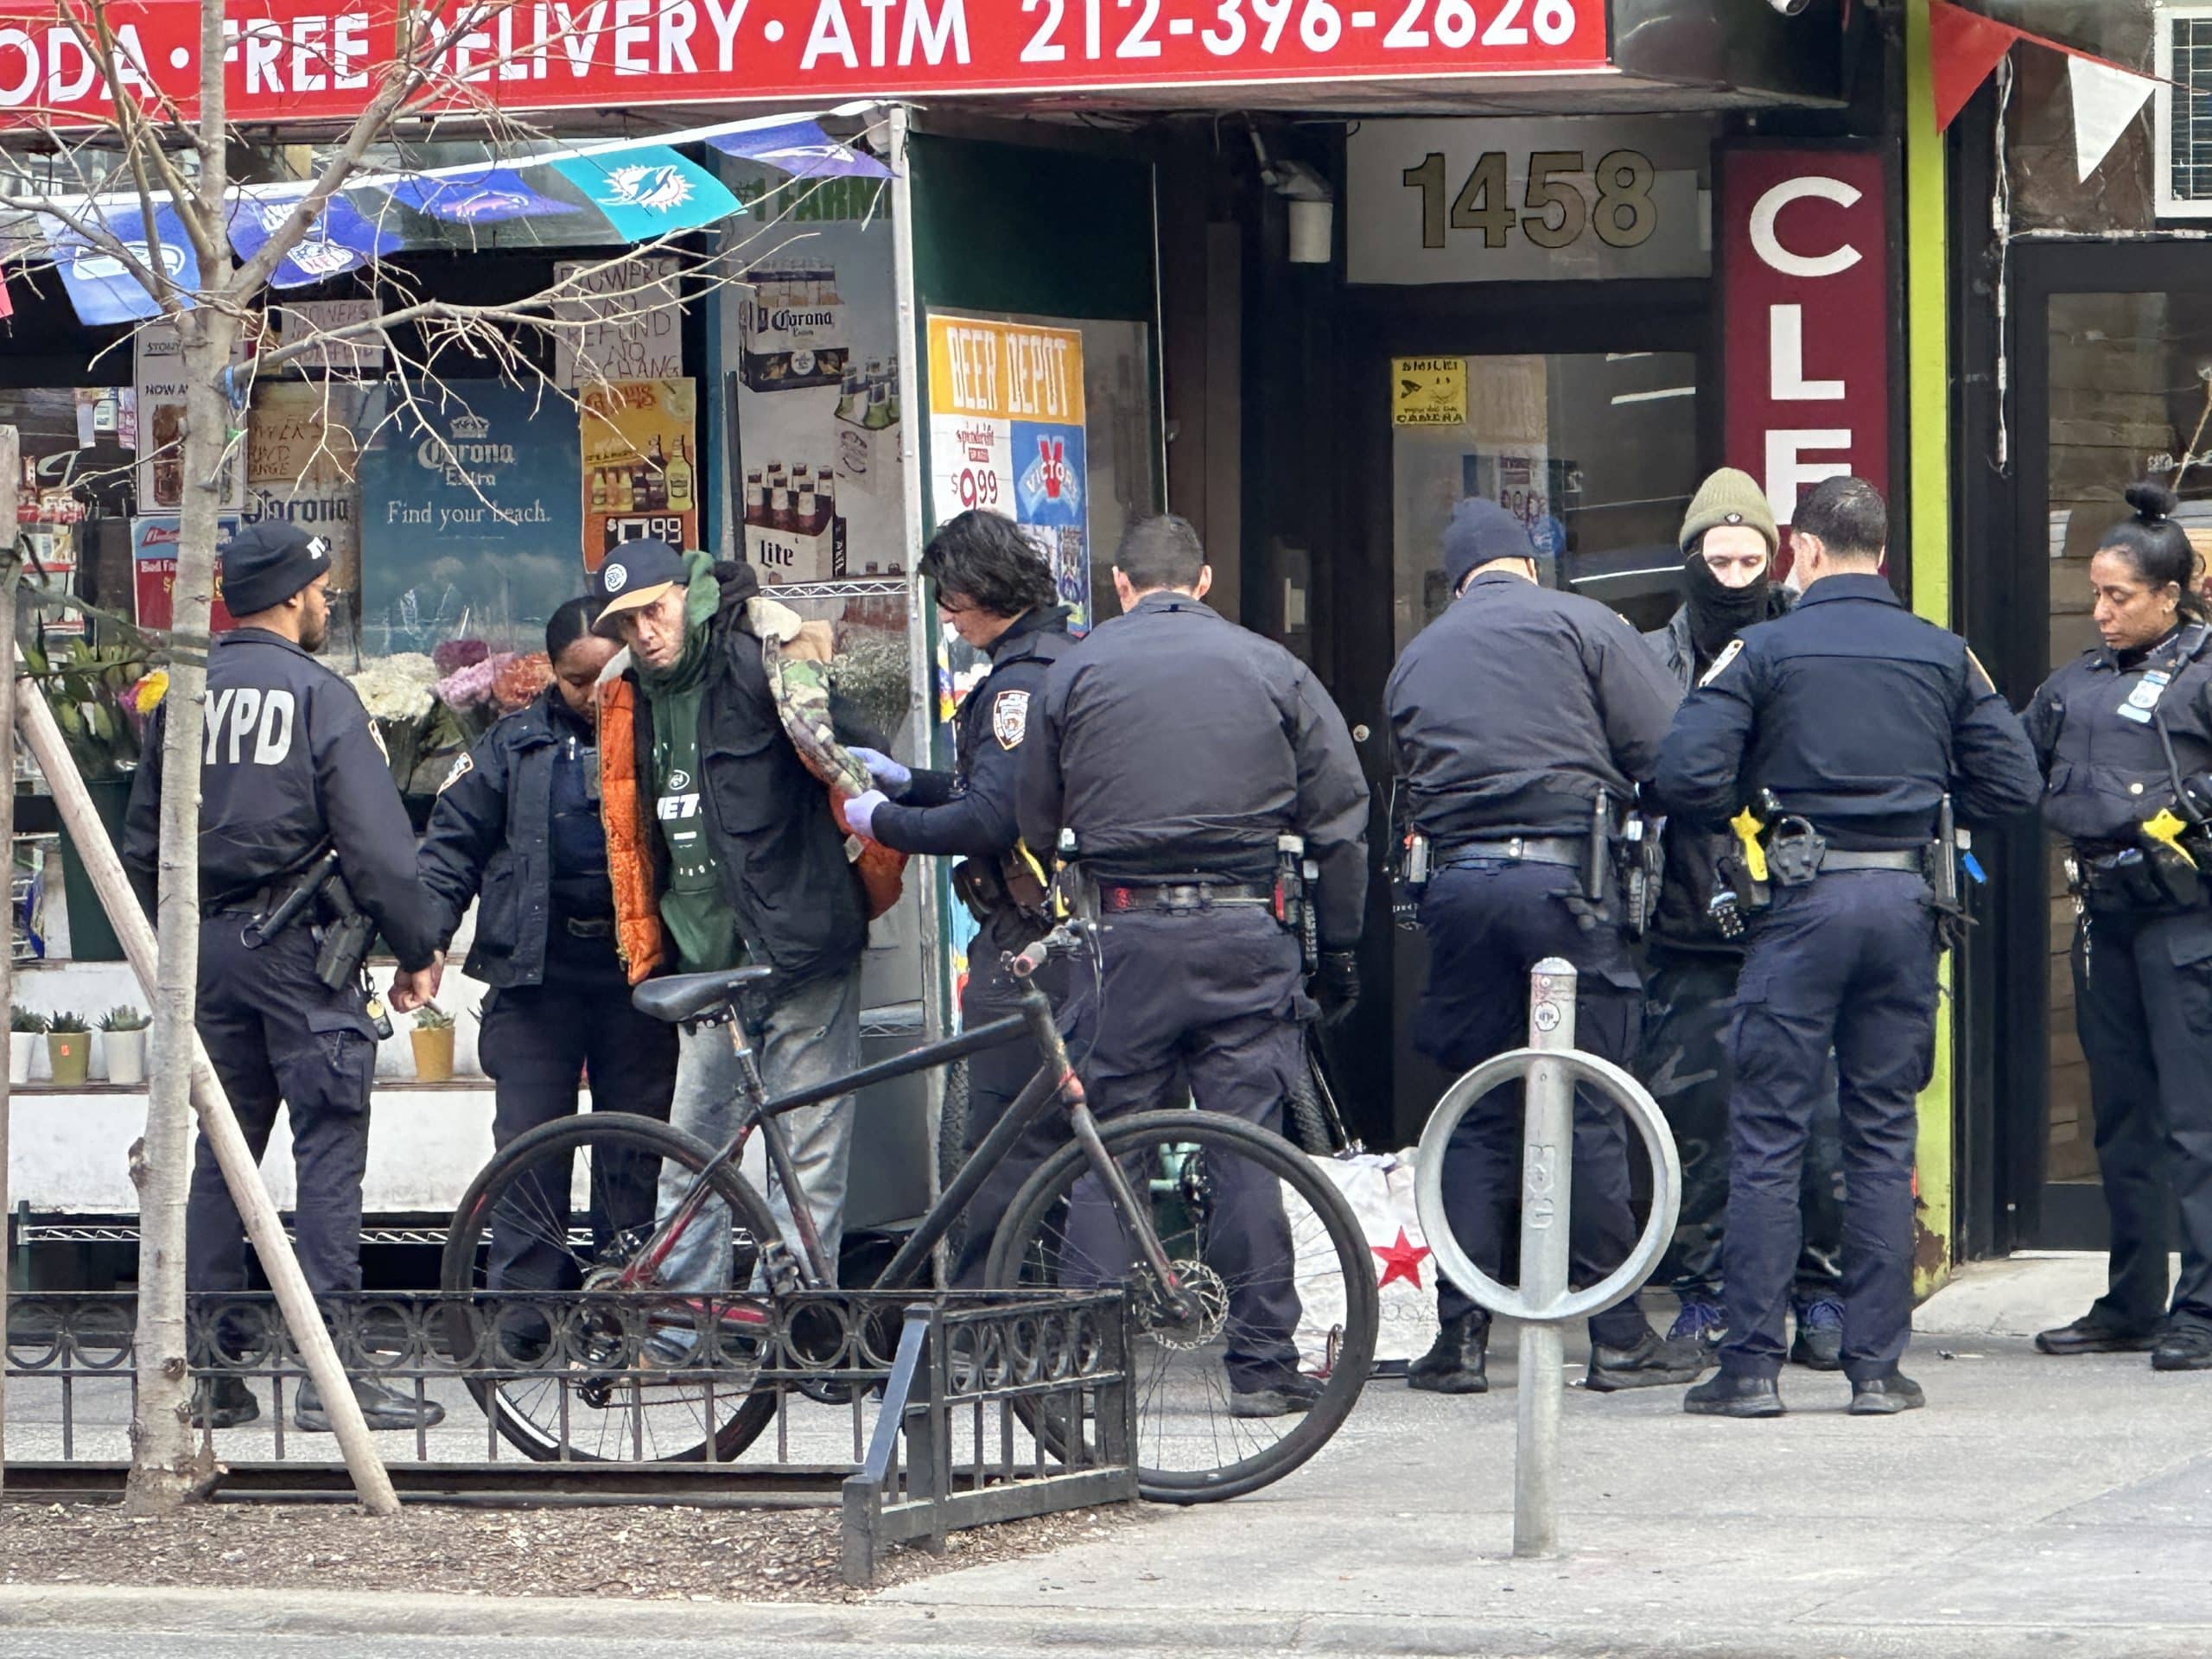 Two bike theft suspects were arrested after a quick search by NYPD officers Friday morning, police say | Upper East Site